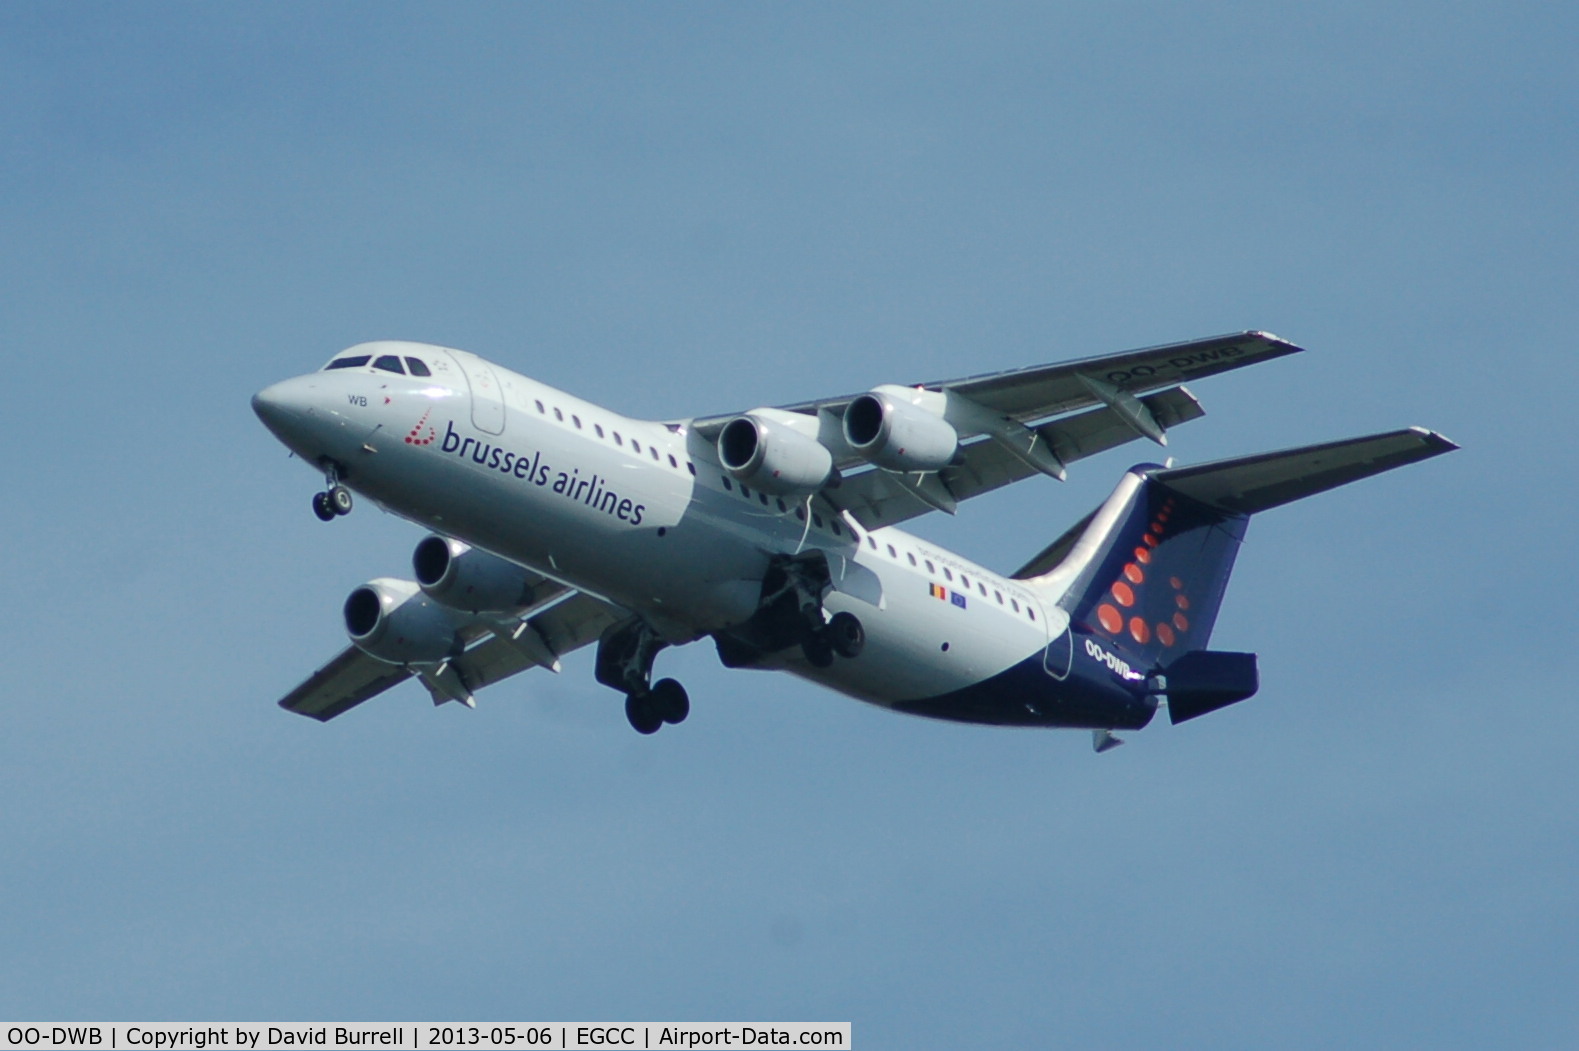 OO-DWB, 1997 British Aerospace Avro 146-RJ100 C/N E3315, Brussels Airlines Avro RJ100 on approach to Manchester Airport.